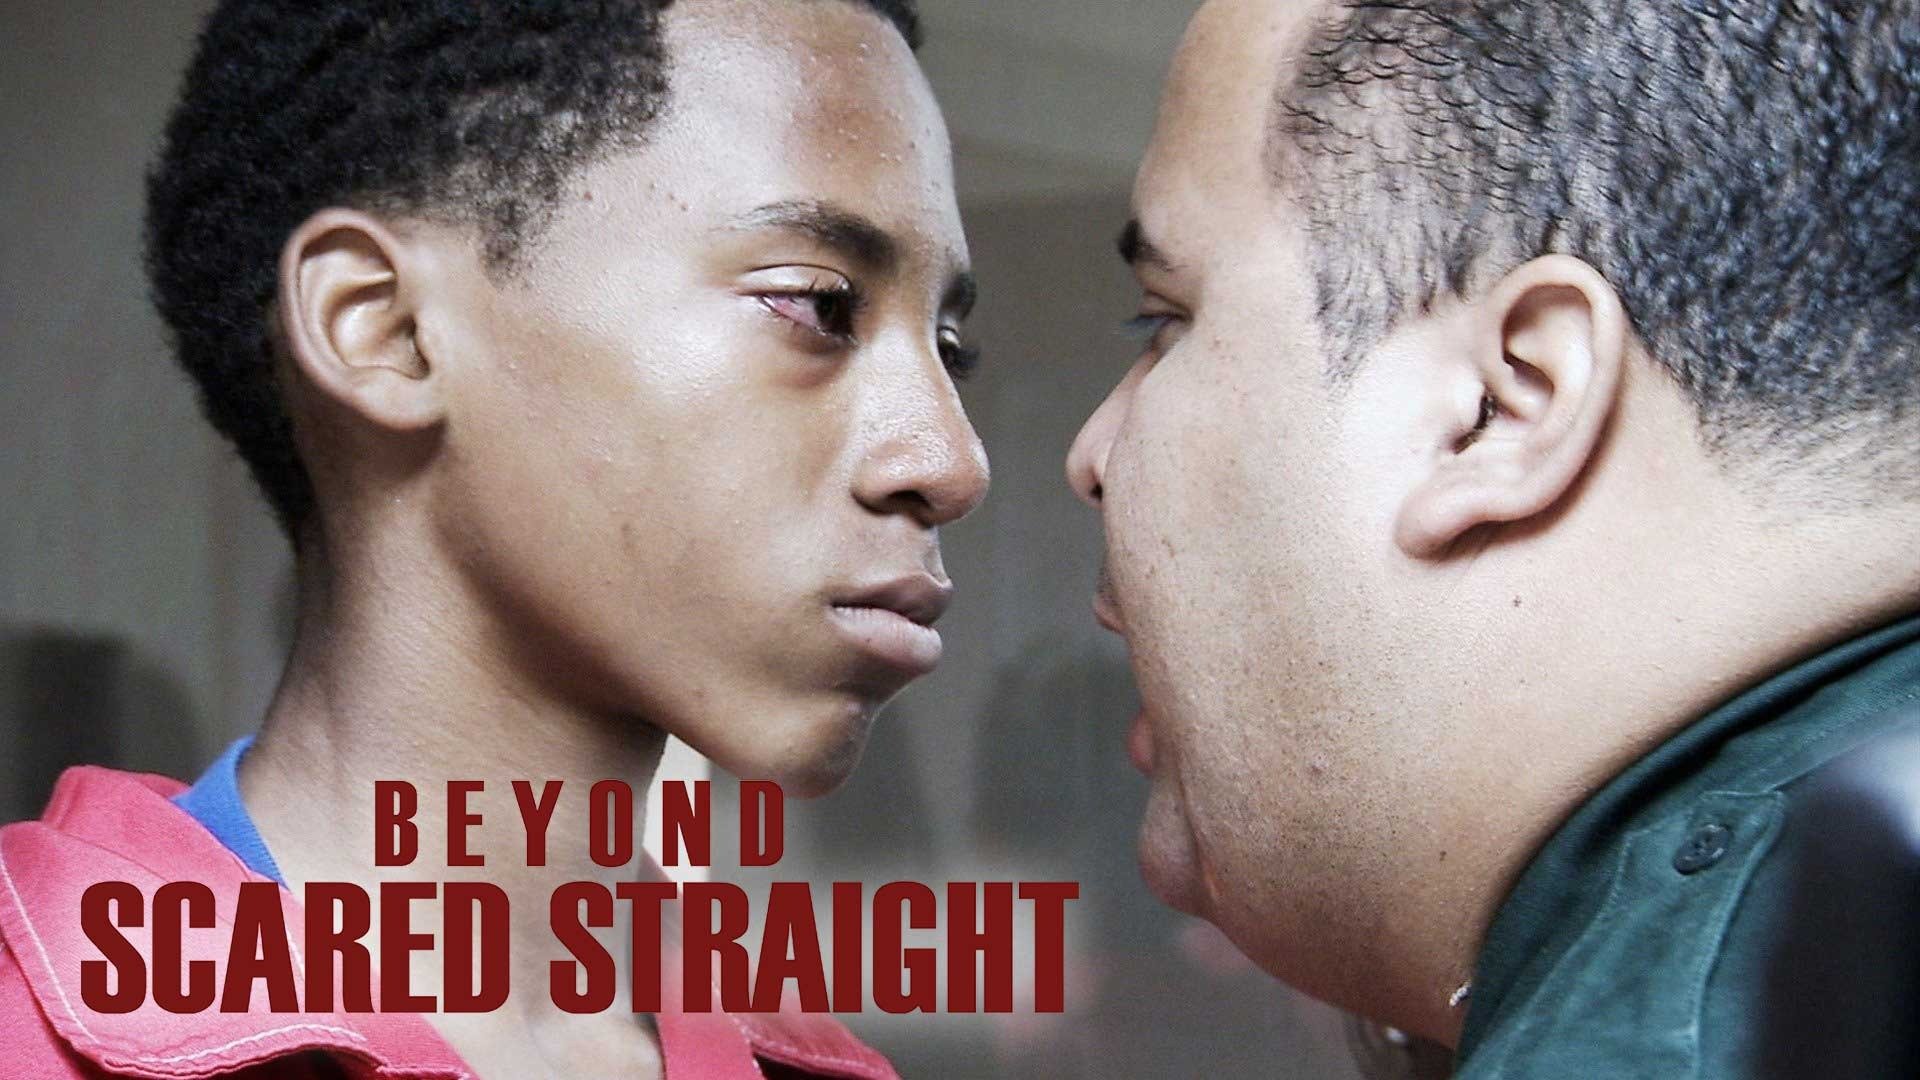 Beyond scared straight full episode